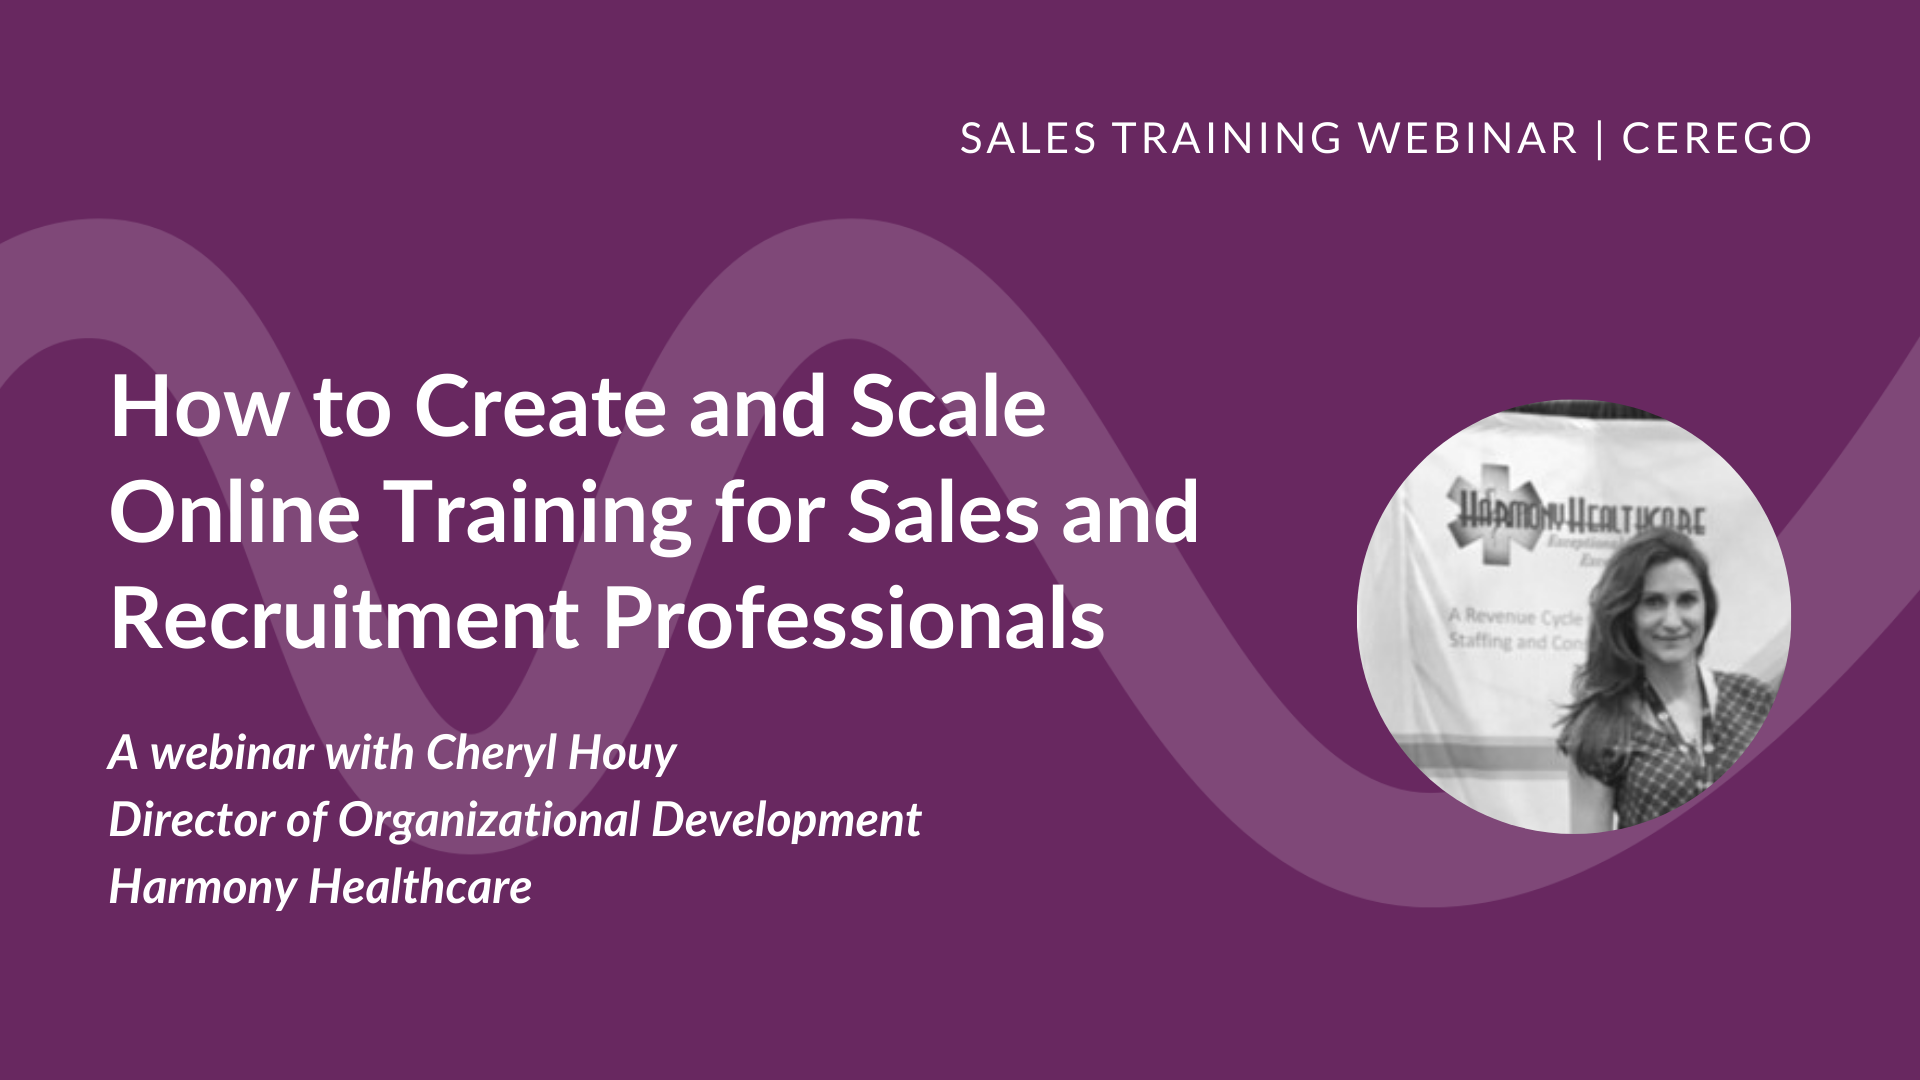 How to Create and Scale Online Training | Cerego Webinar